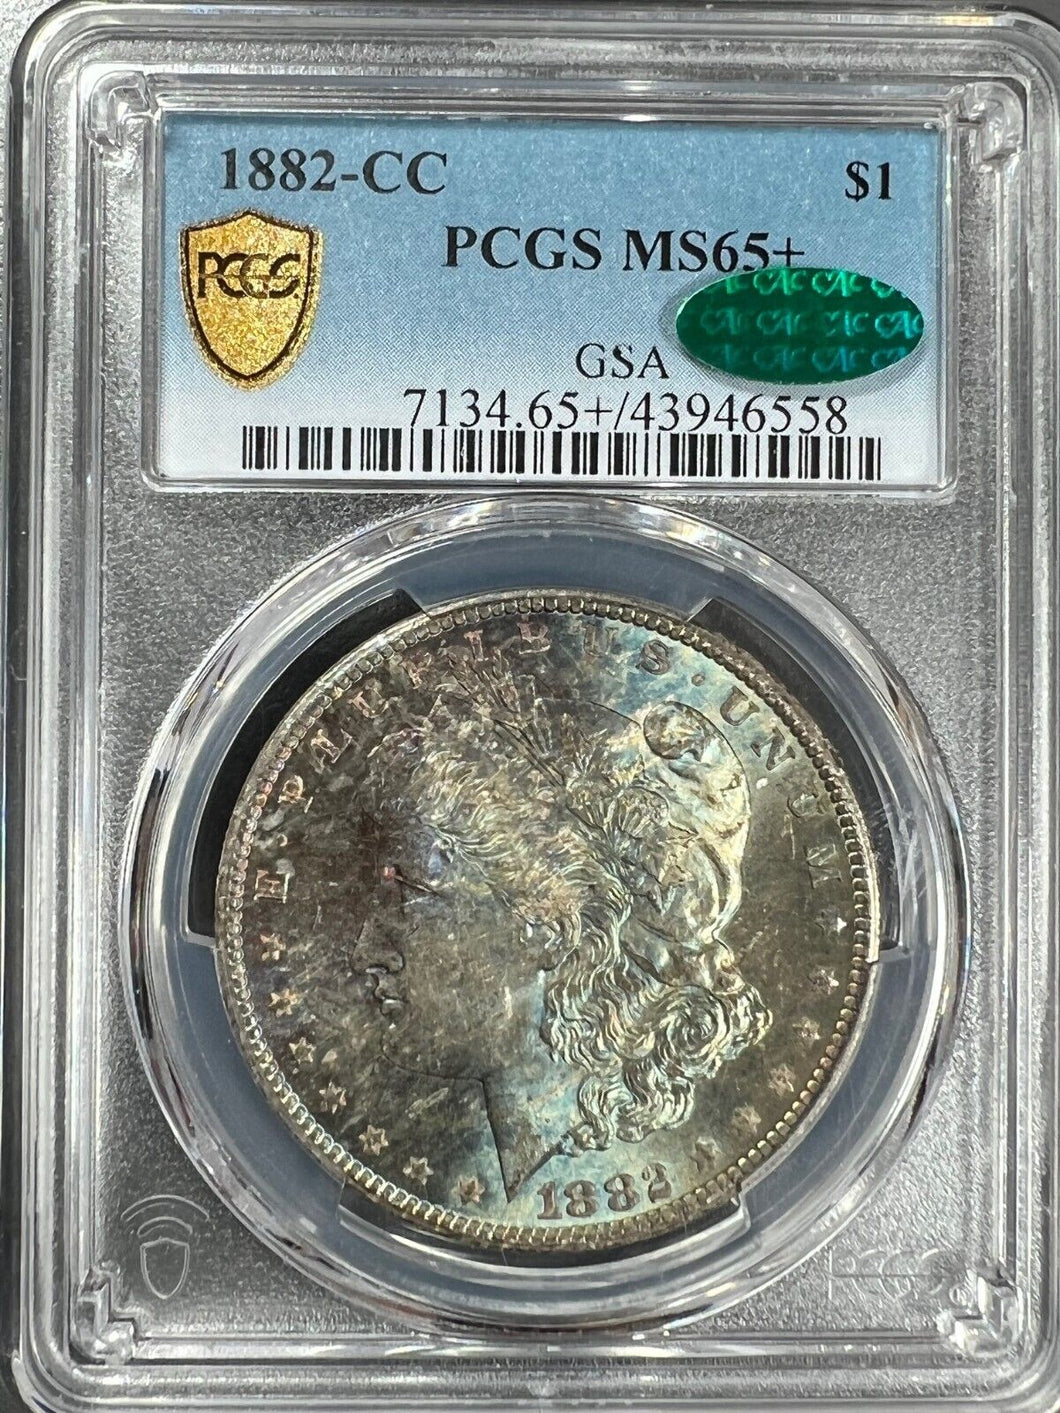 1882-CC Morgan Silver Dollar PCGS MS65+ (CAC) - - Variegated Turquoise & Golden